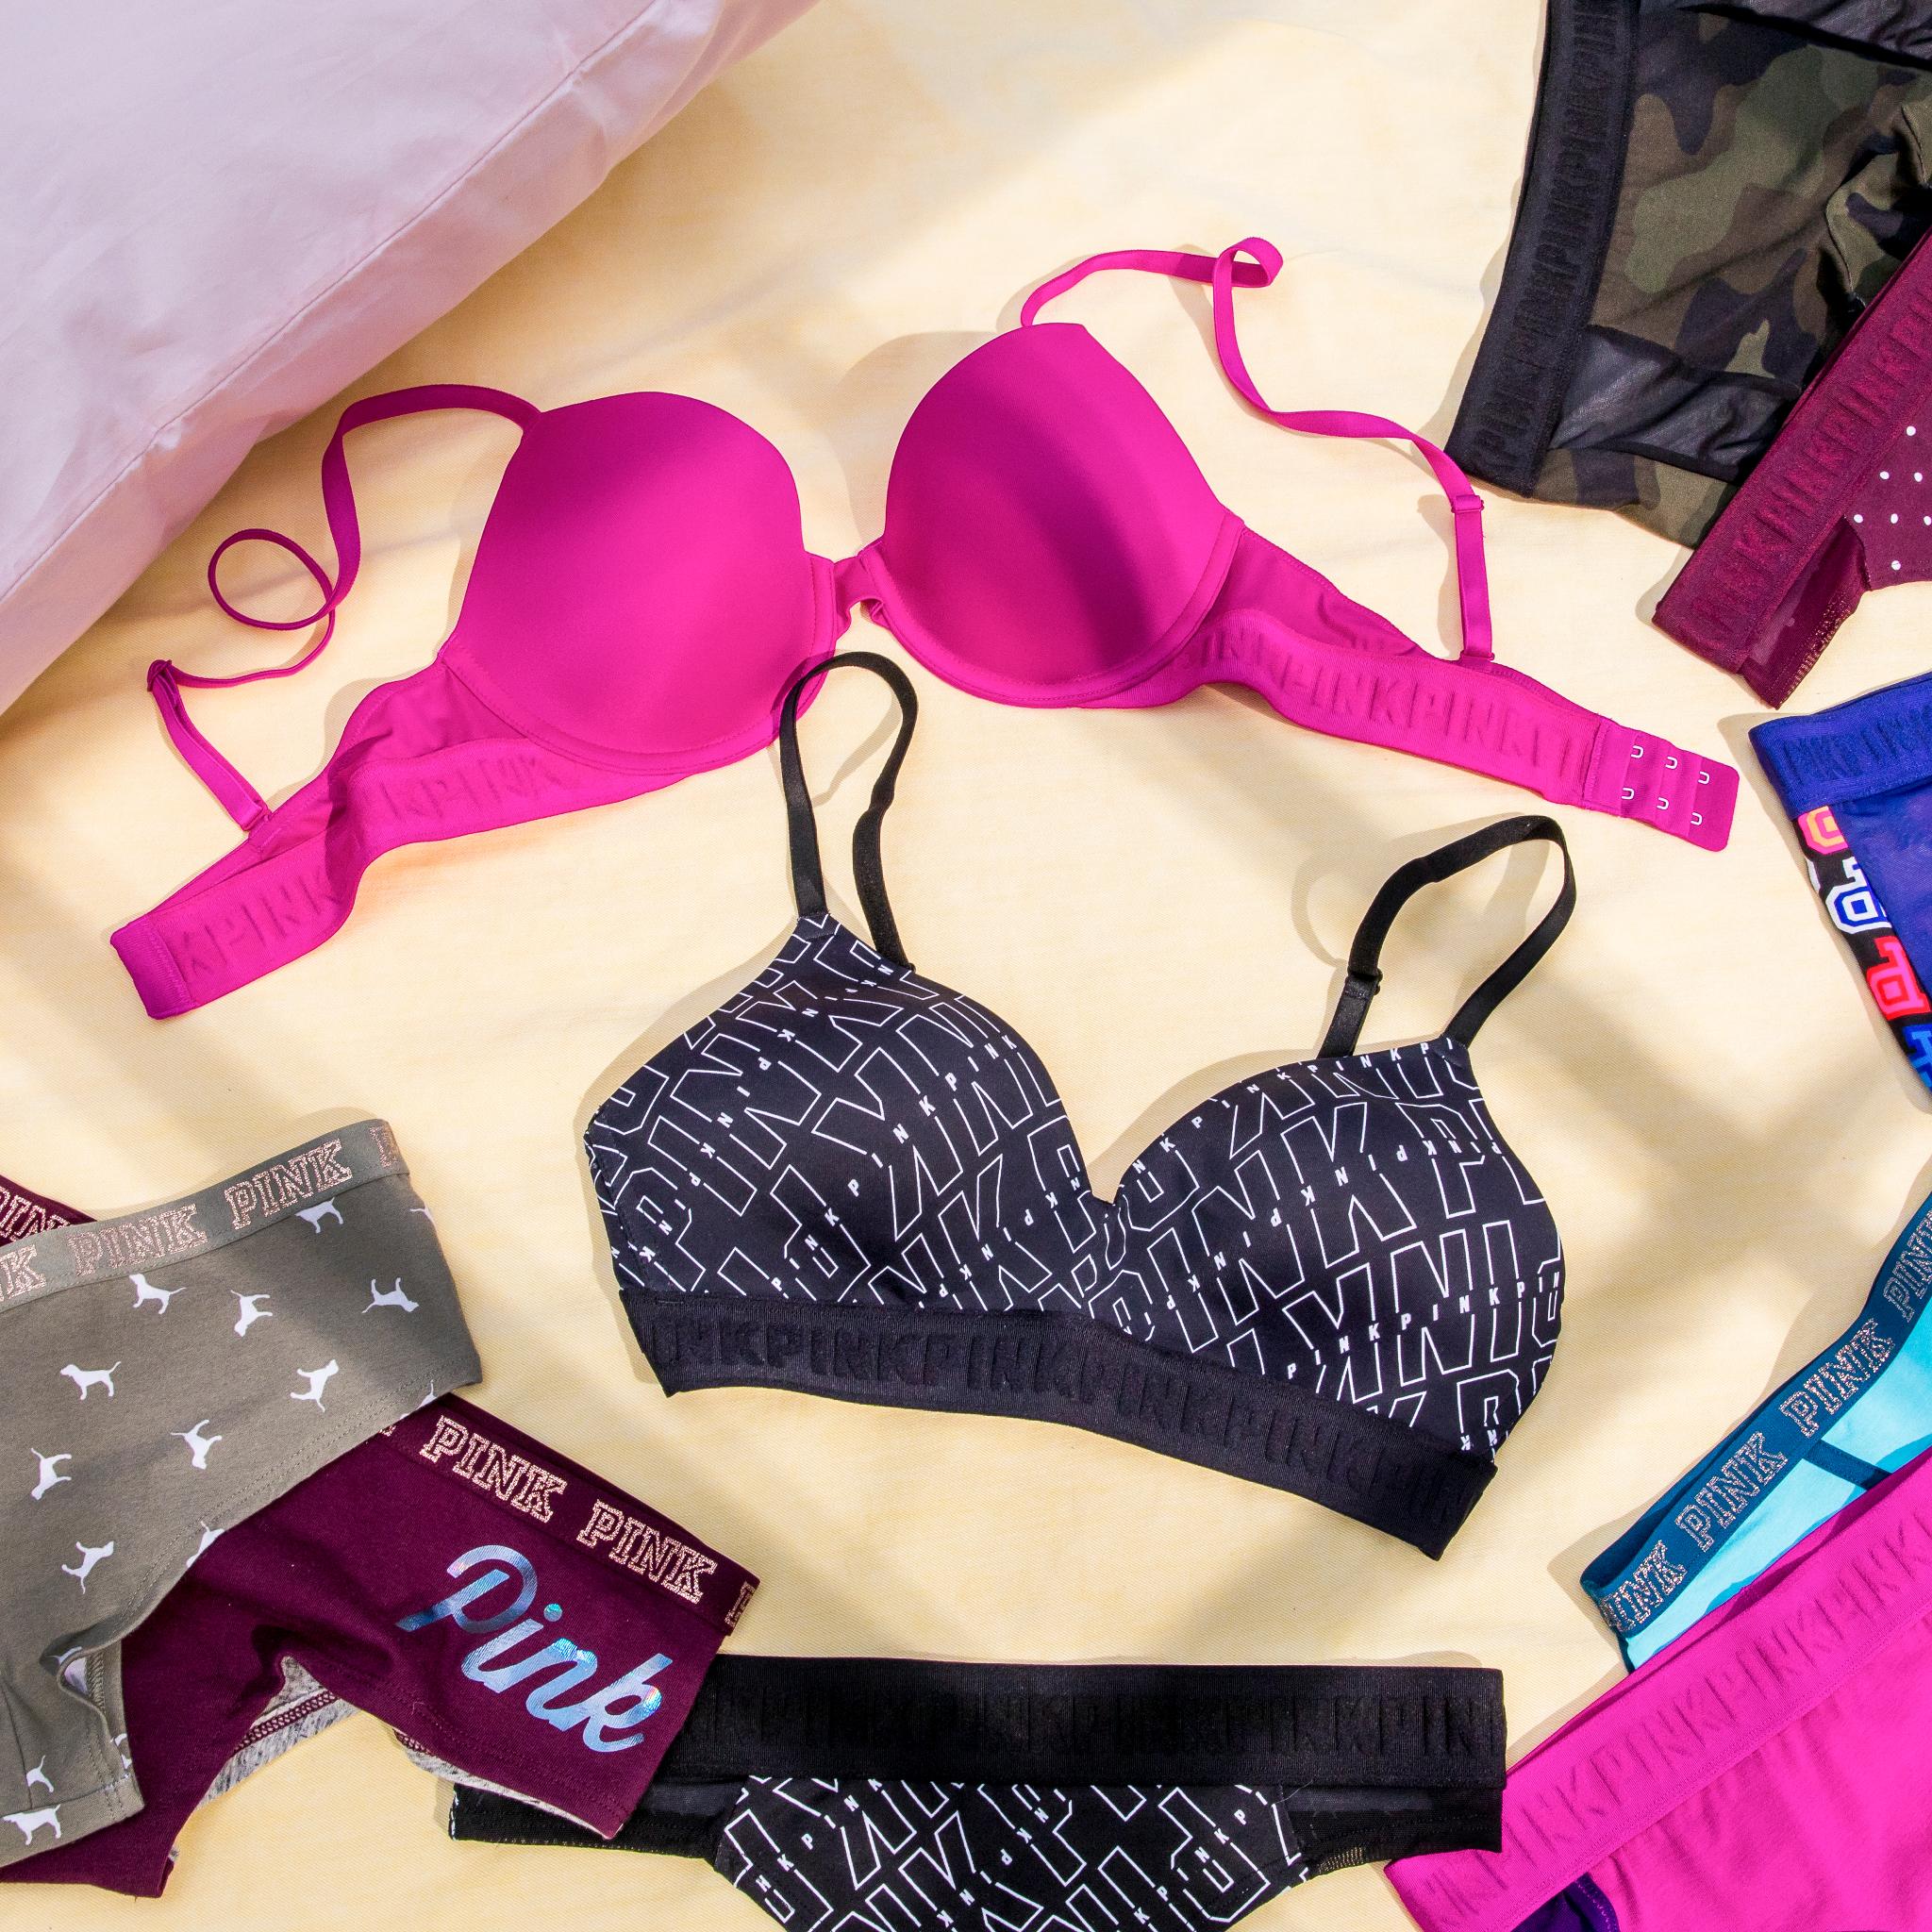 vspink on X: Panty Welcome Week starts today! 🙌 All PINK Panties